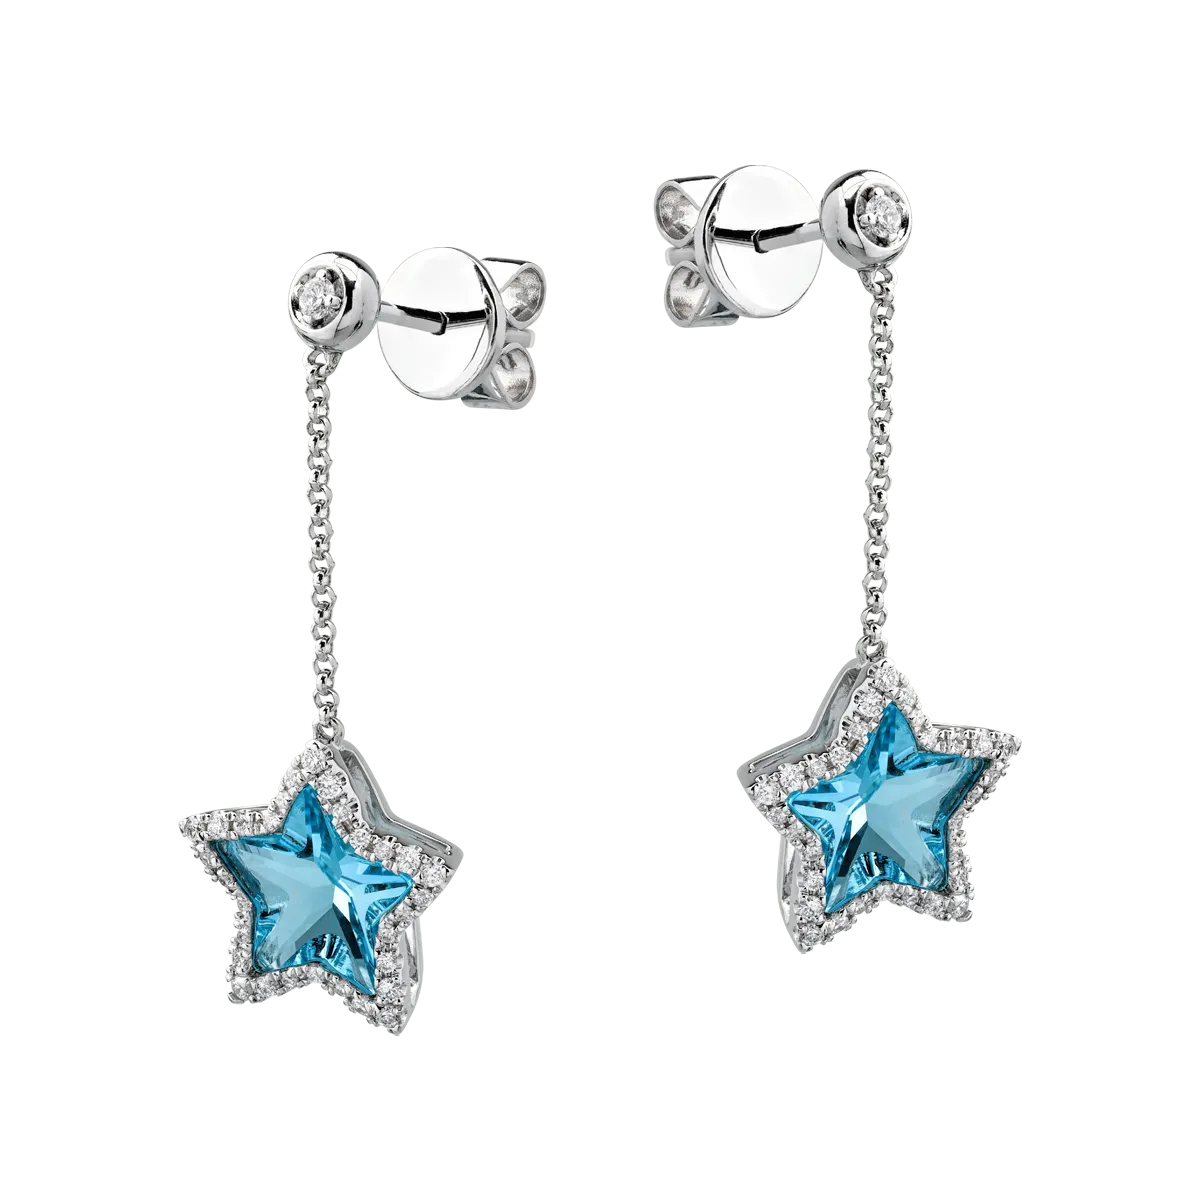 18K white gold earrings with 2.7ct blue topaz and 0.3ct diamonds